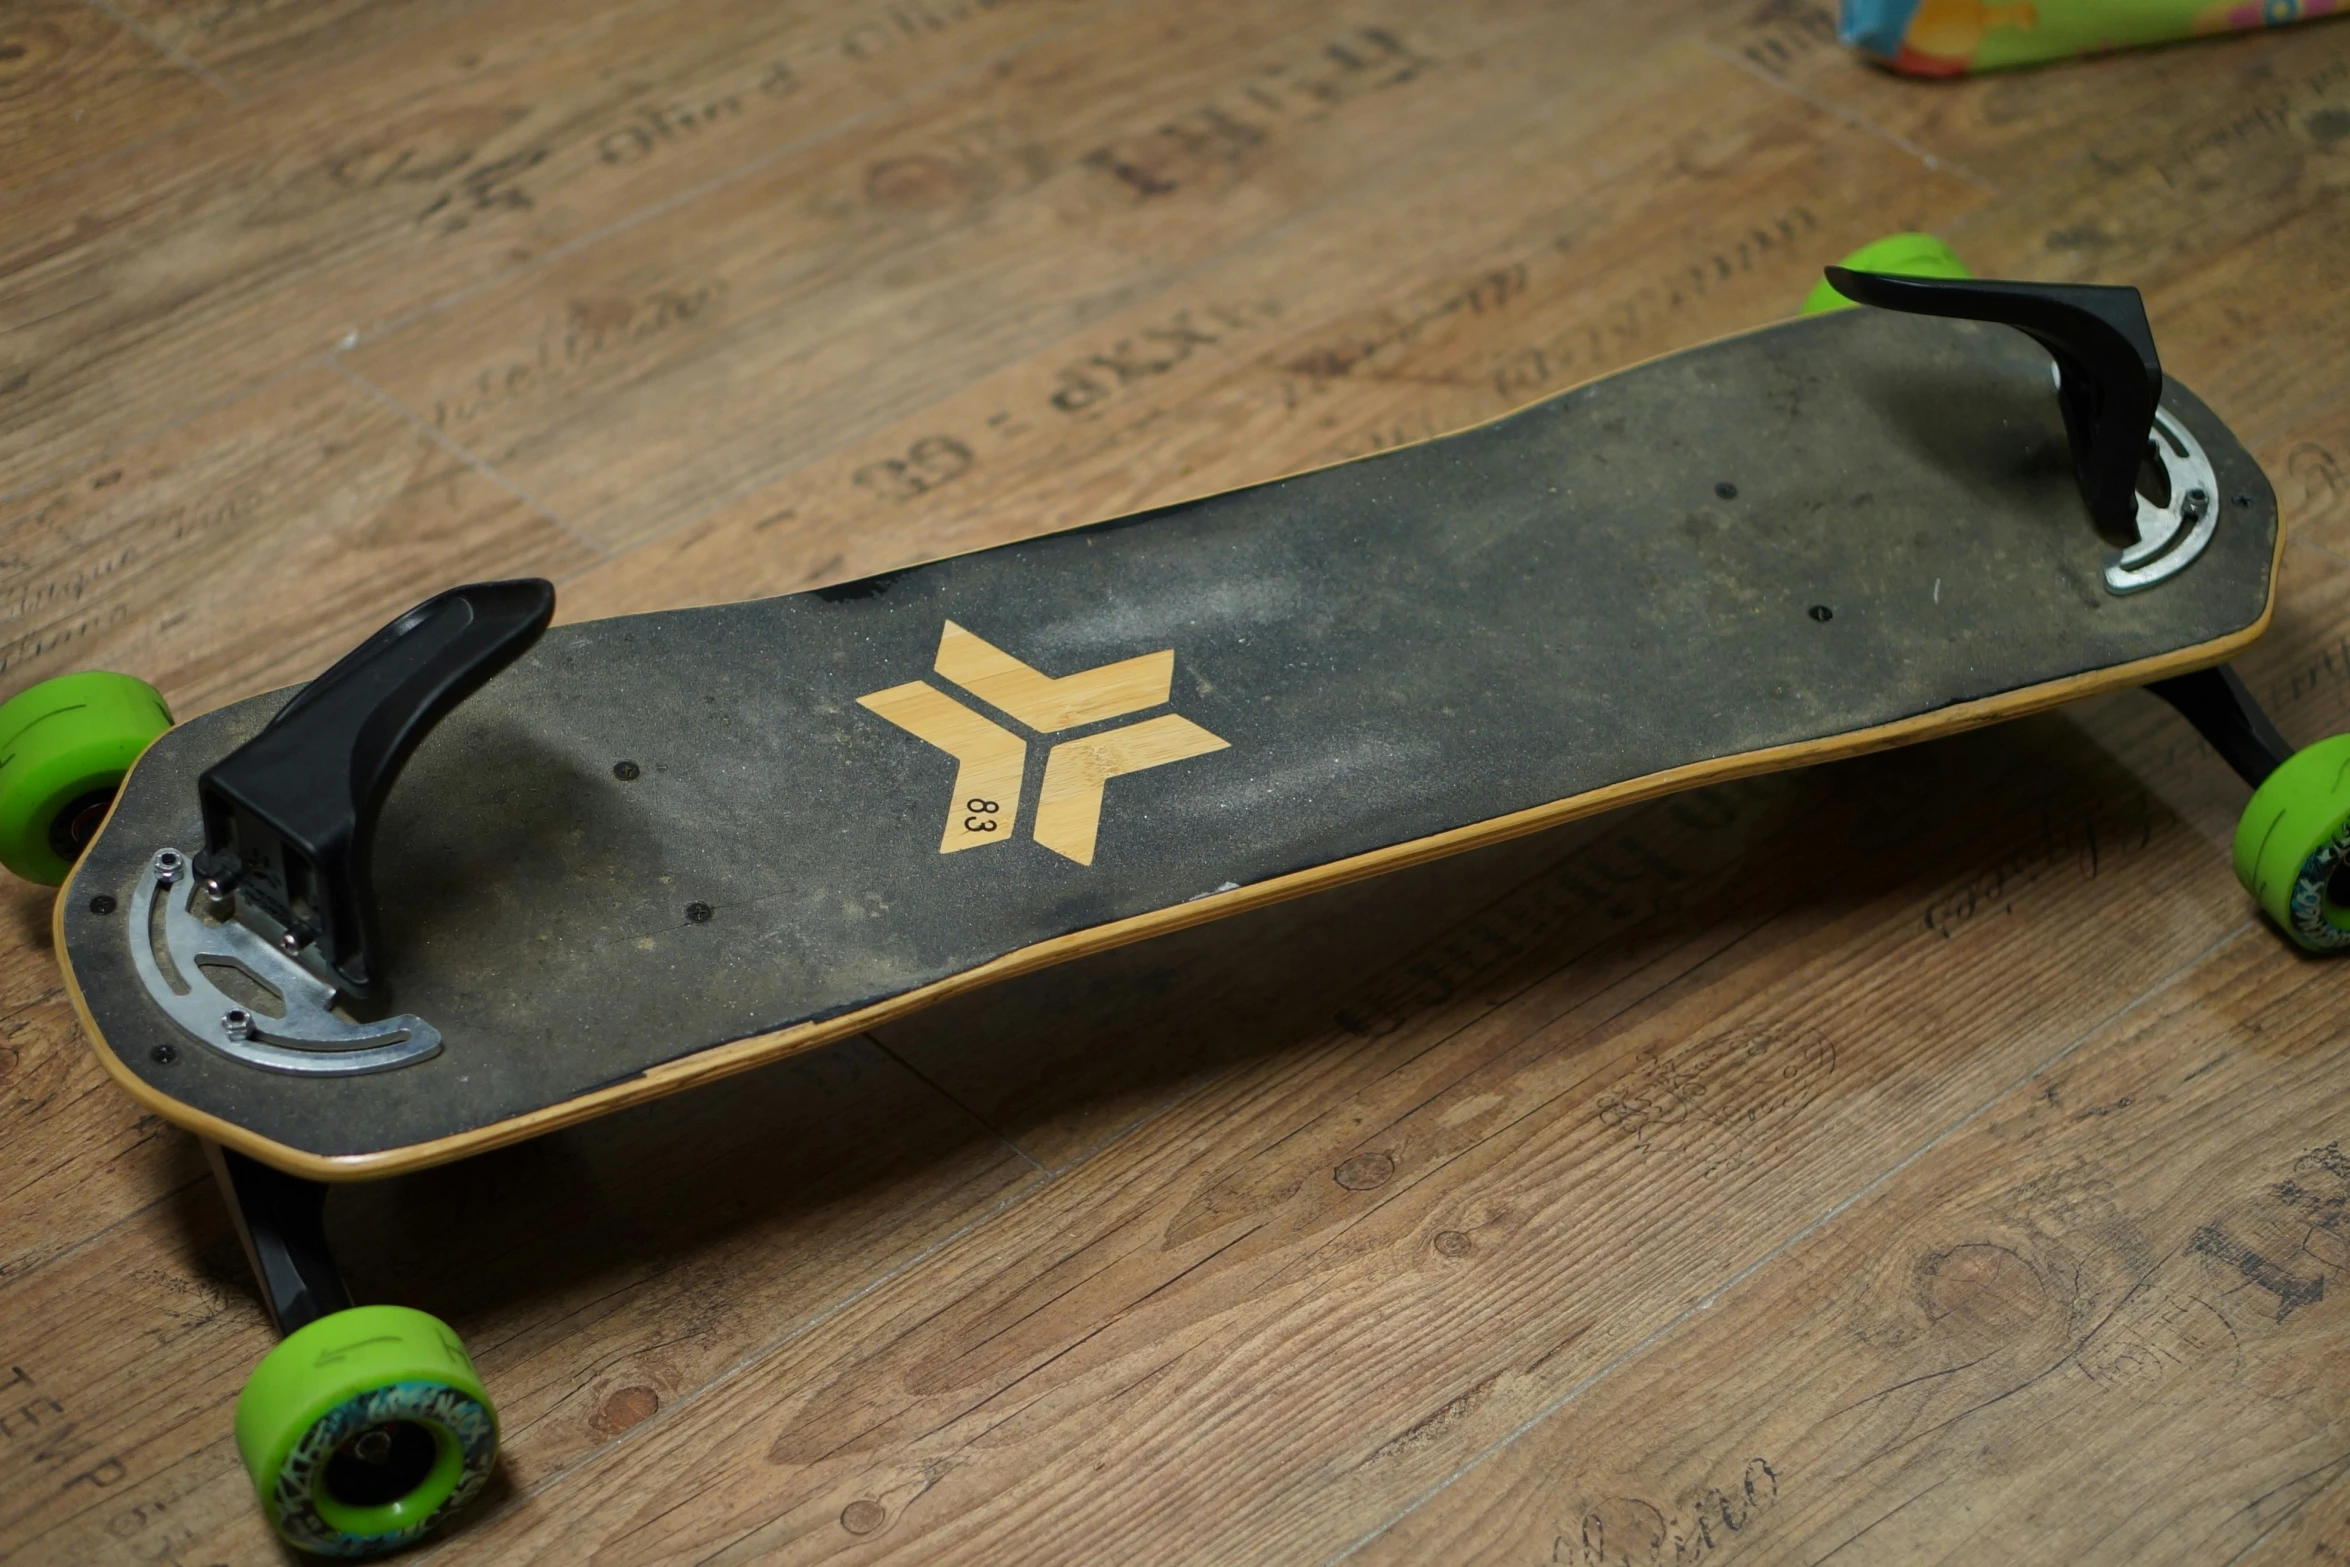 a skateboard with wheels is on a wooden floor